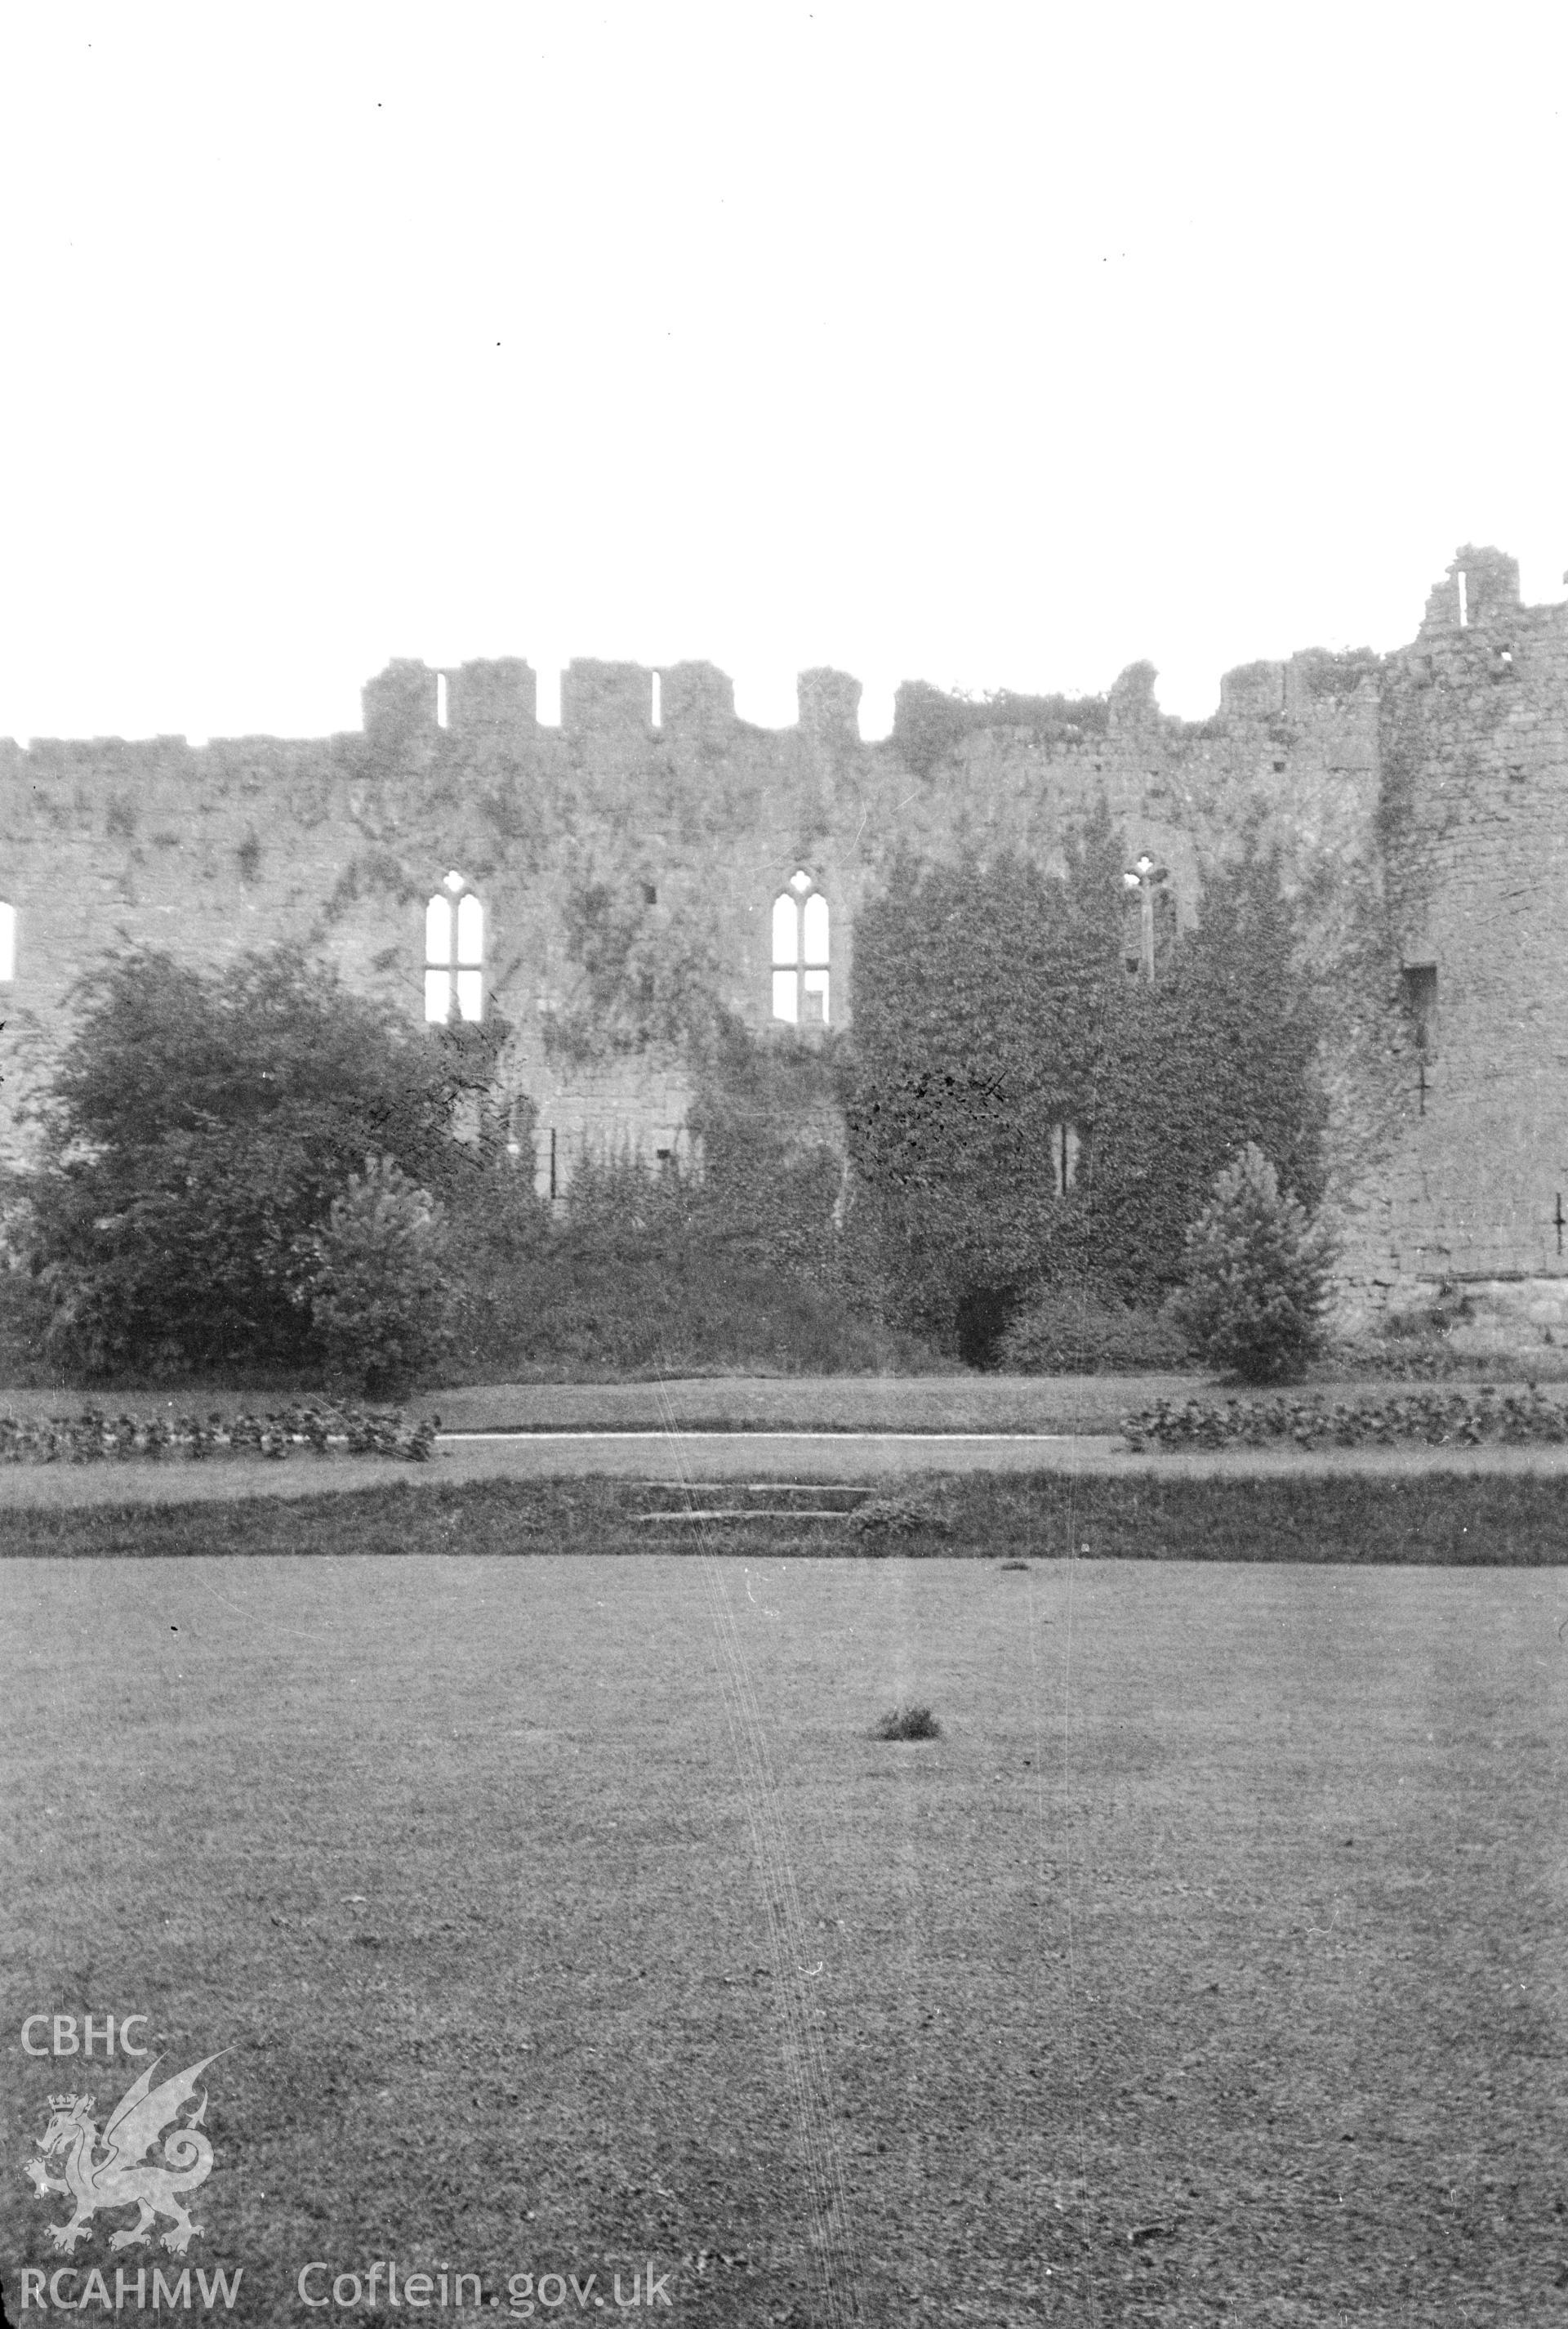 Digital copy of nitrate negative showing Caldicot Castle. From the Cadw Monuments in Care Collection.